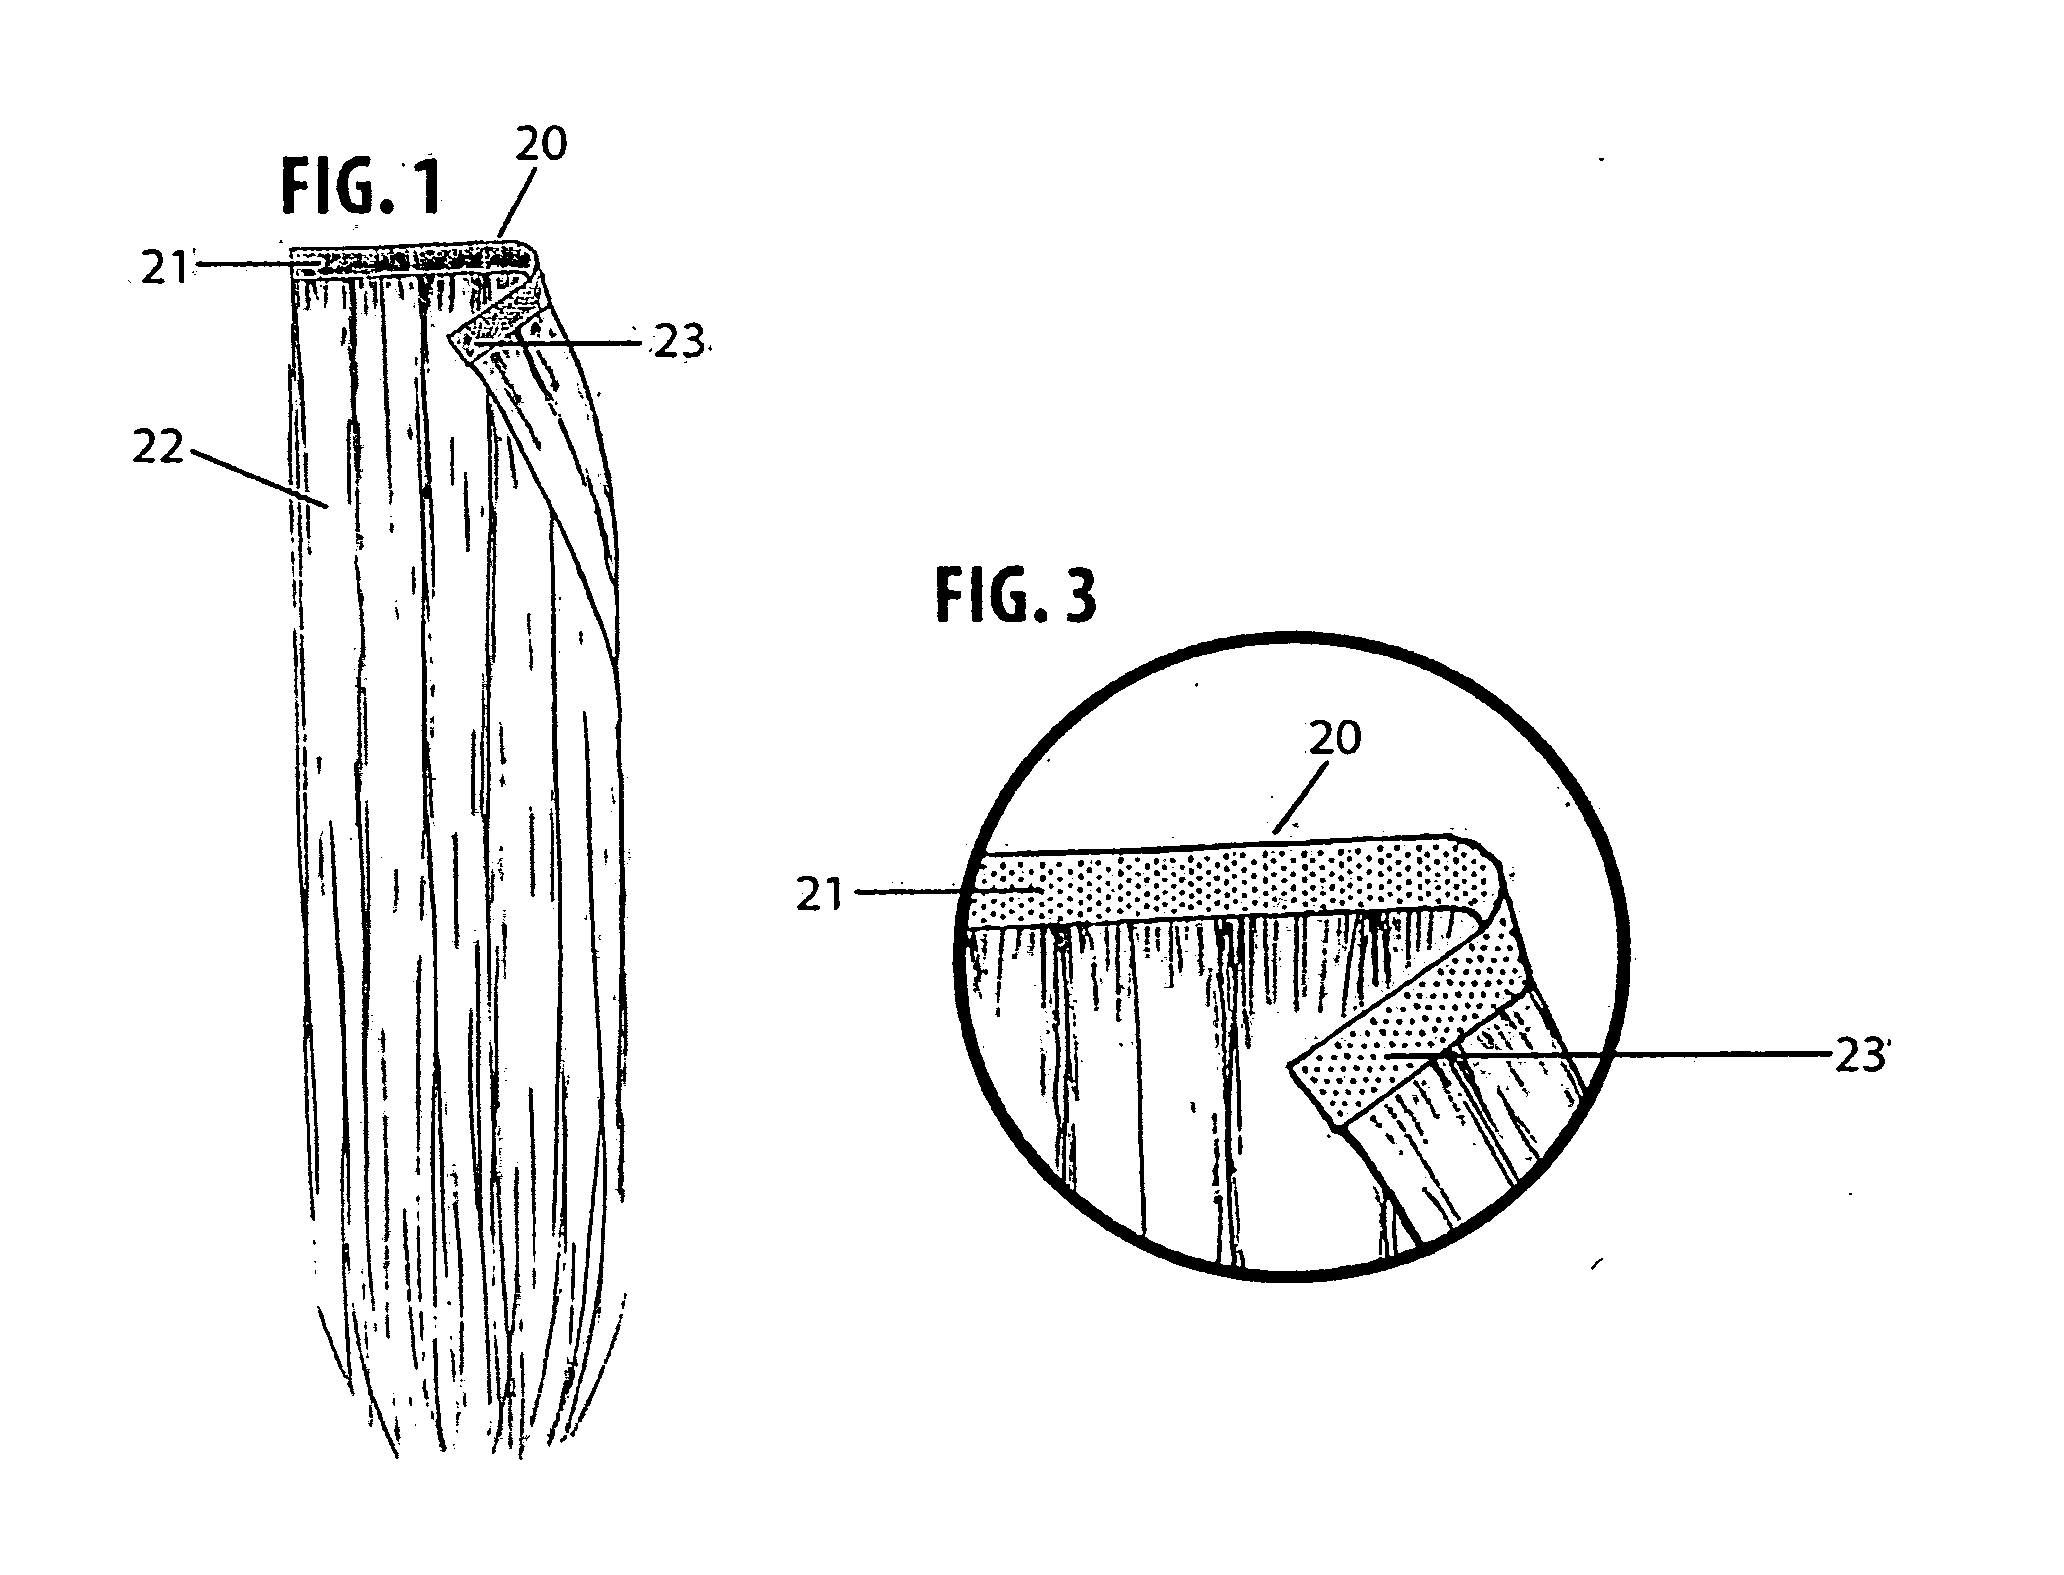 Hair extension system and method